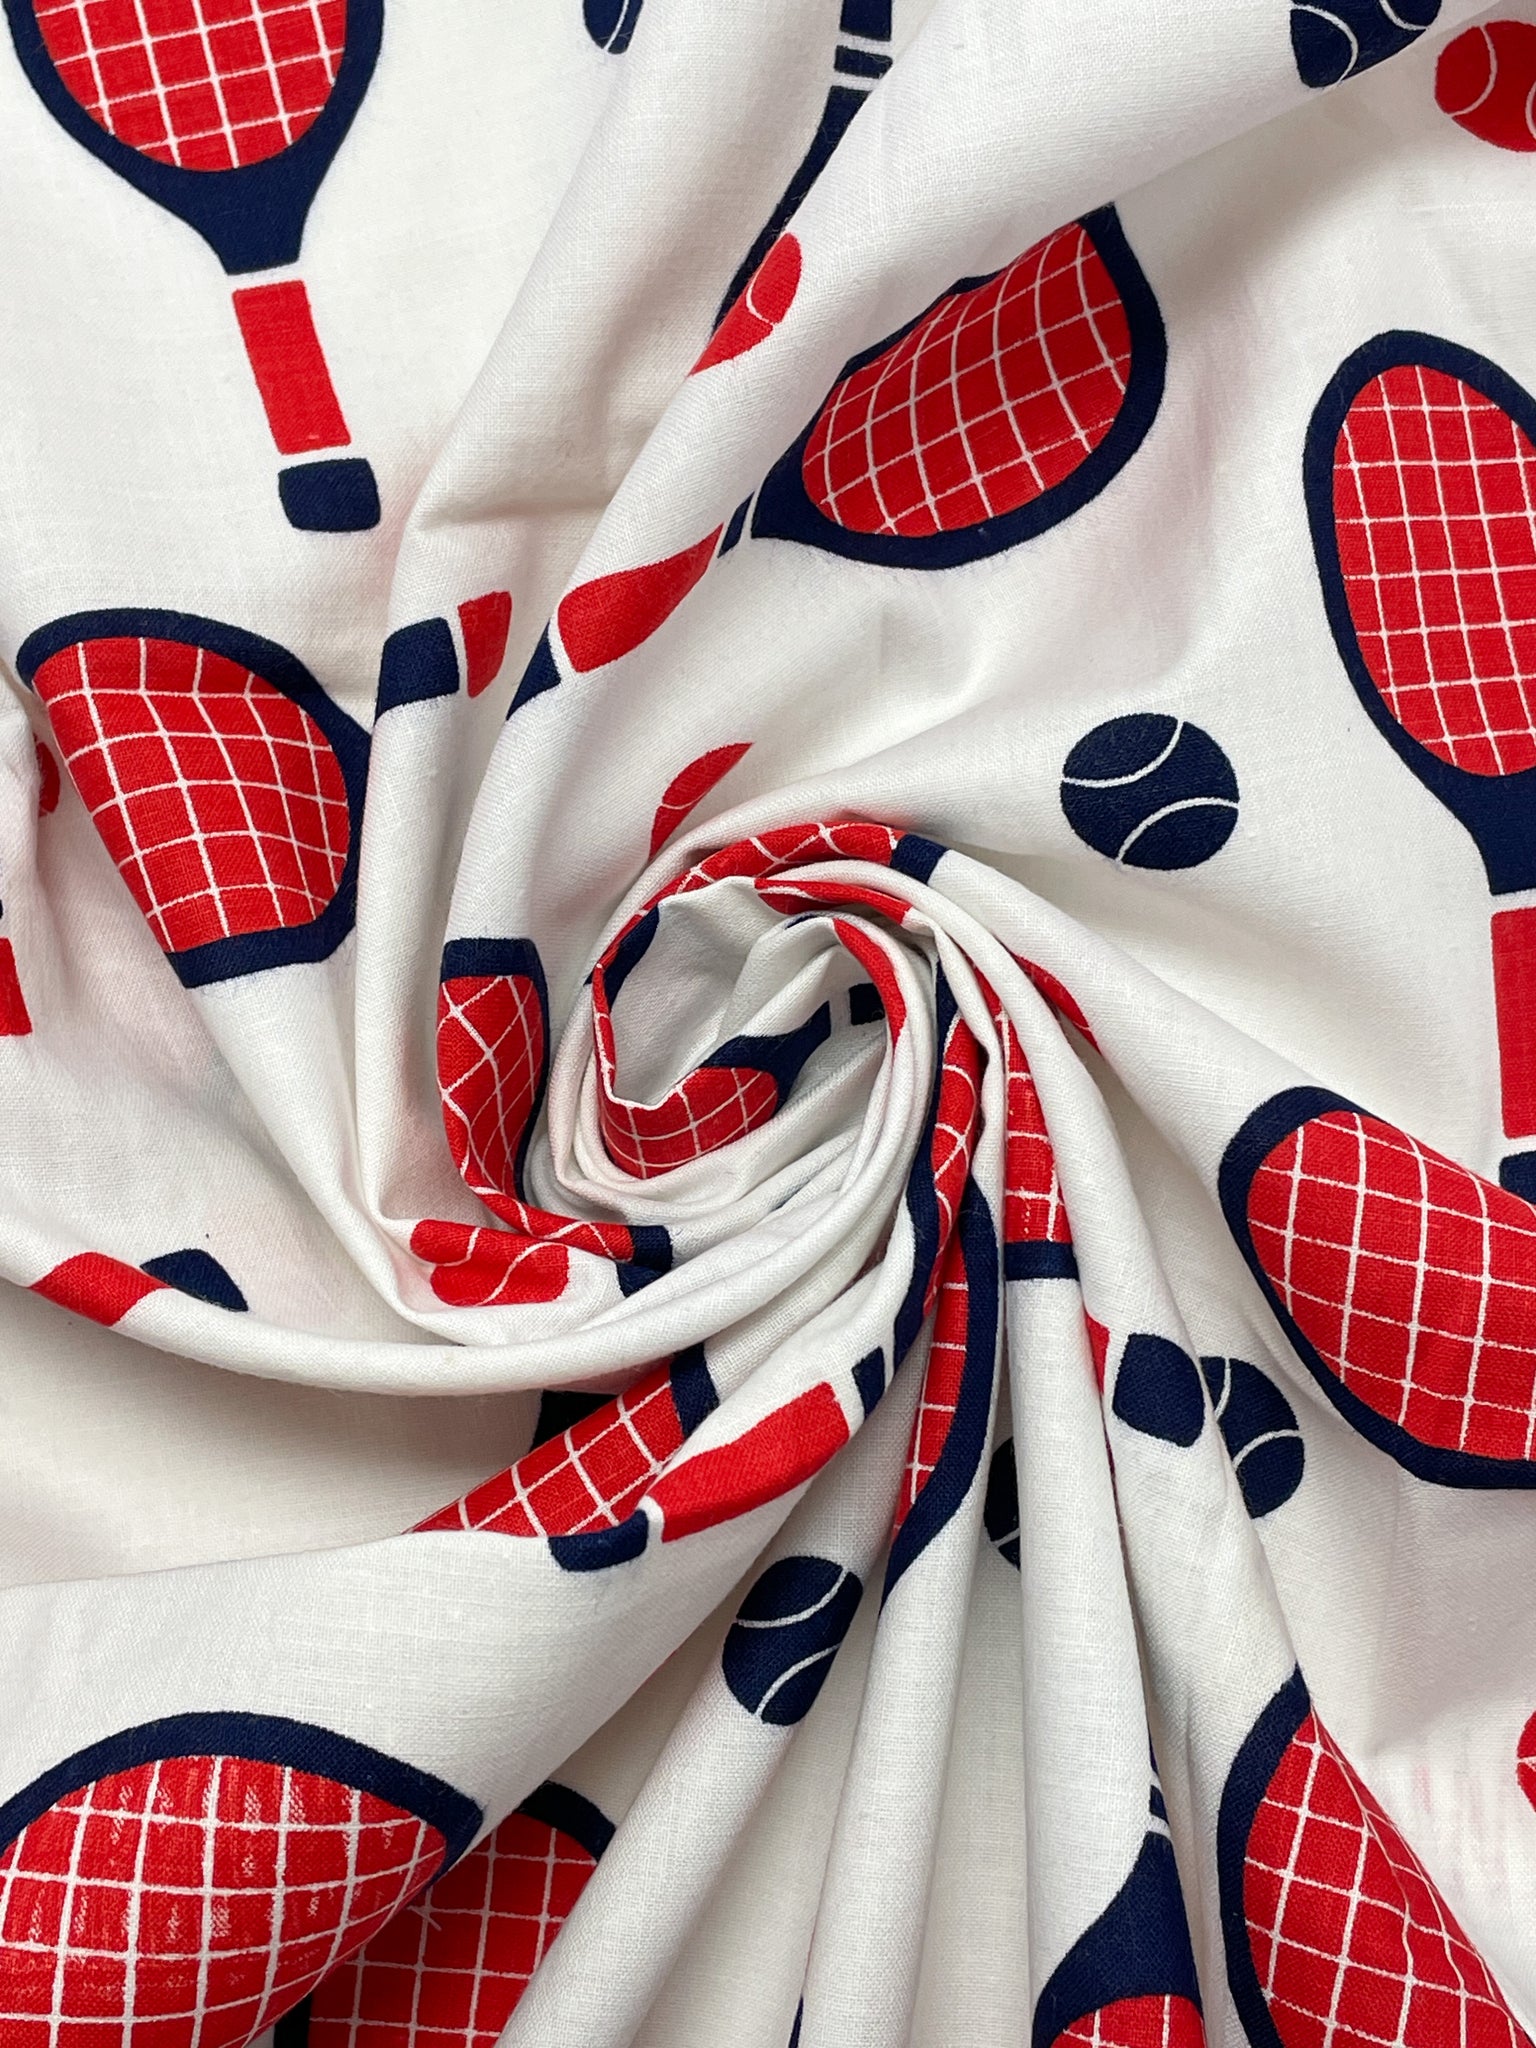 1 7/8 YD Cotton - White with Red and Blue Tennis Rackets and Balls